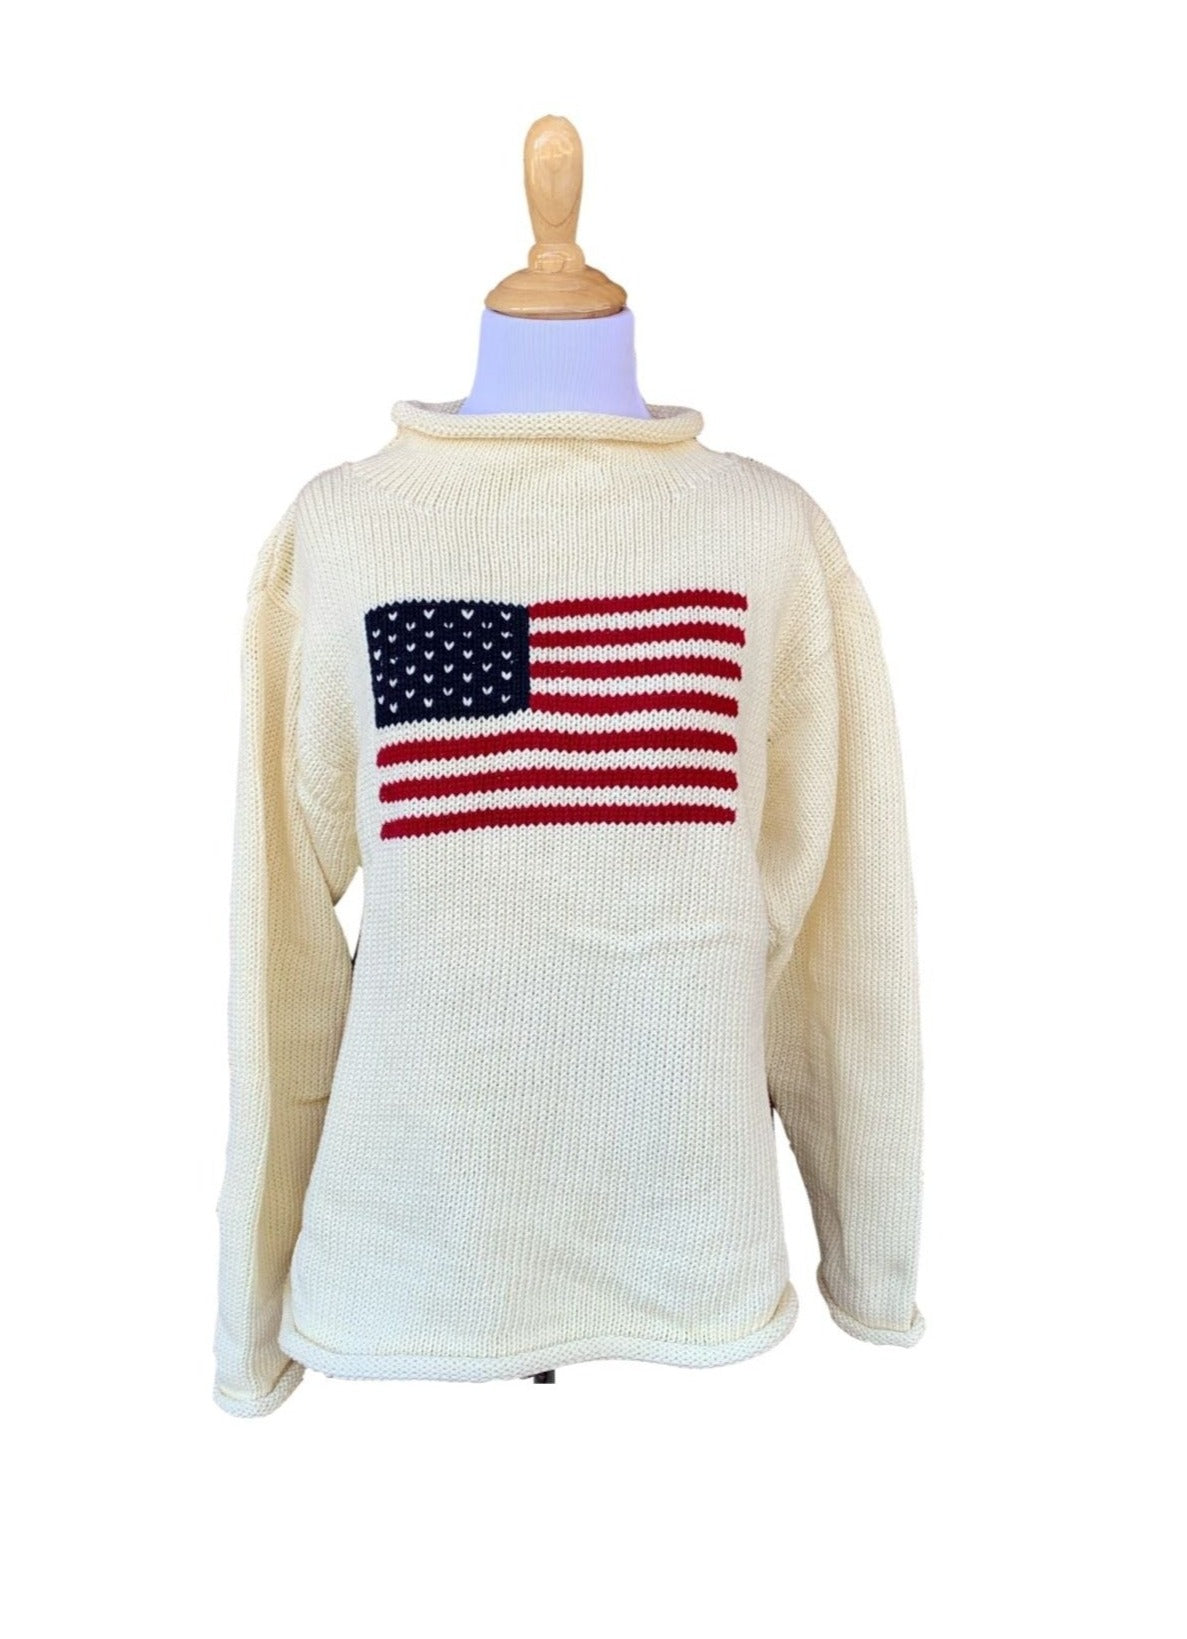 Ladies Ivory American Flag Sweater - The Red Wagon